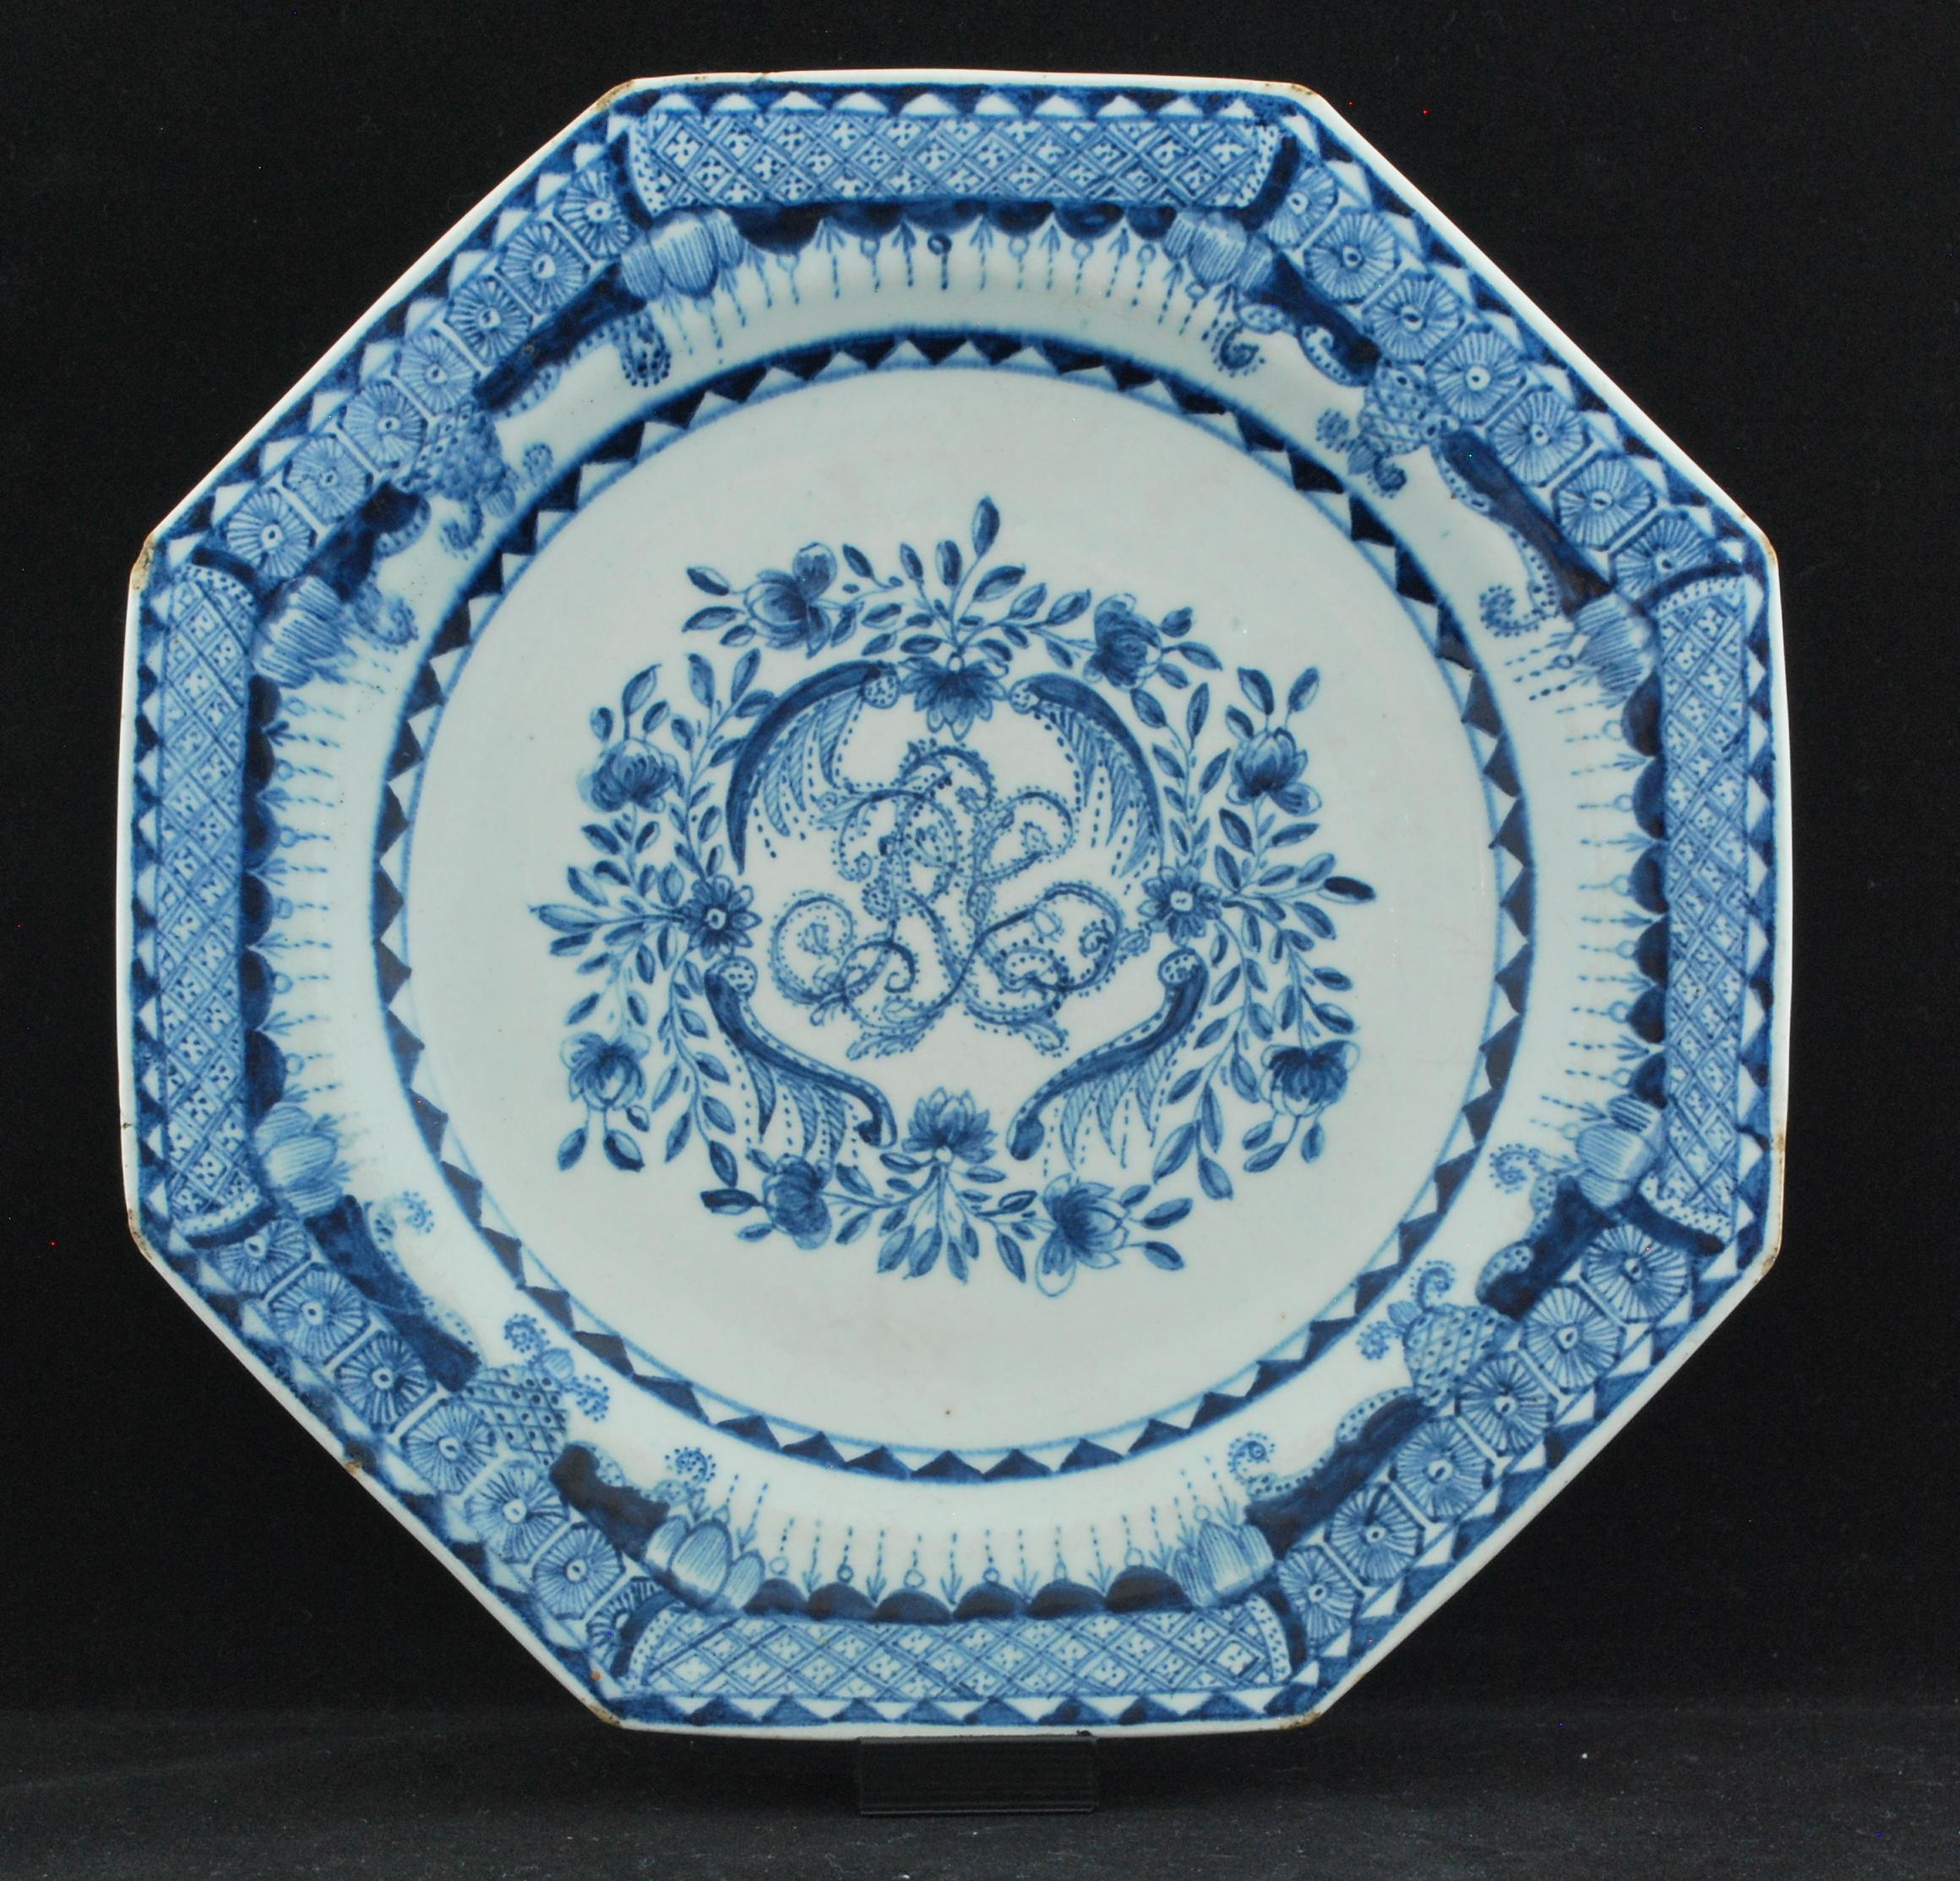 The so-called ‘Crowther Plate’ dated January 1770:

Octagonal, painted in blue underglaze with the monogram ‘RC’ in a floral cartouche and with elaborate scroll, pendant and cell and foliage rim borders with stylized pineapples. The underside in